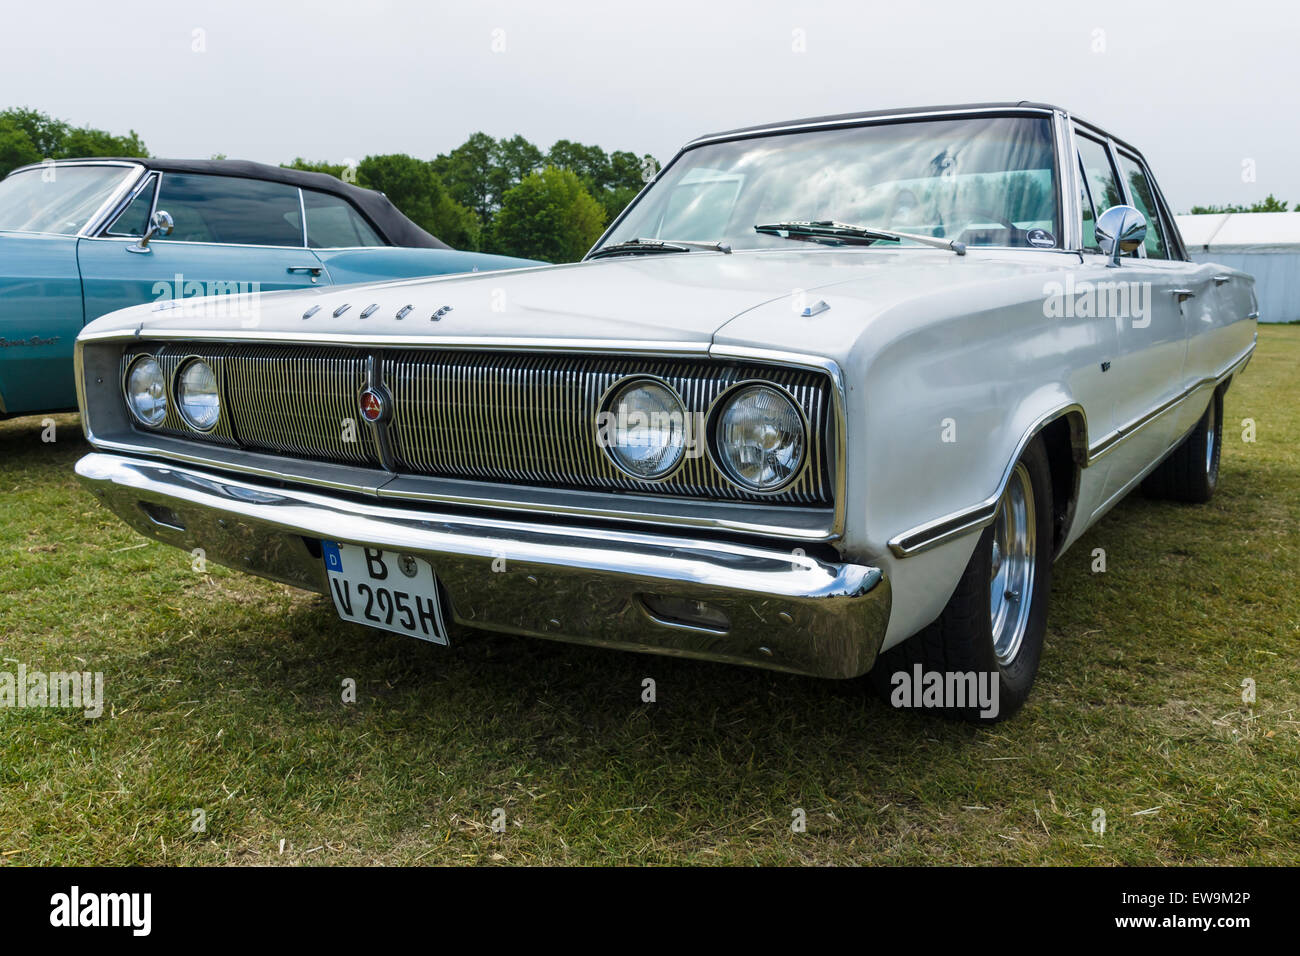 PAAREN IM GLIEN, GERMANY - MAY 23, 2015: Mid-size car Dodge Coronet 440, 1967. The oldtimer show in MAFZ. Stock Photo